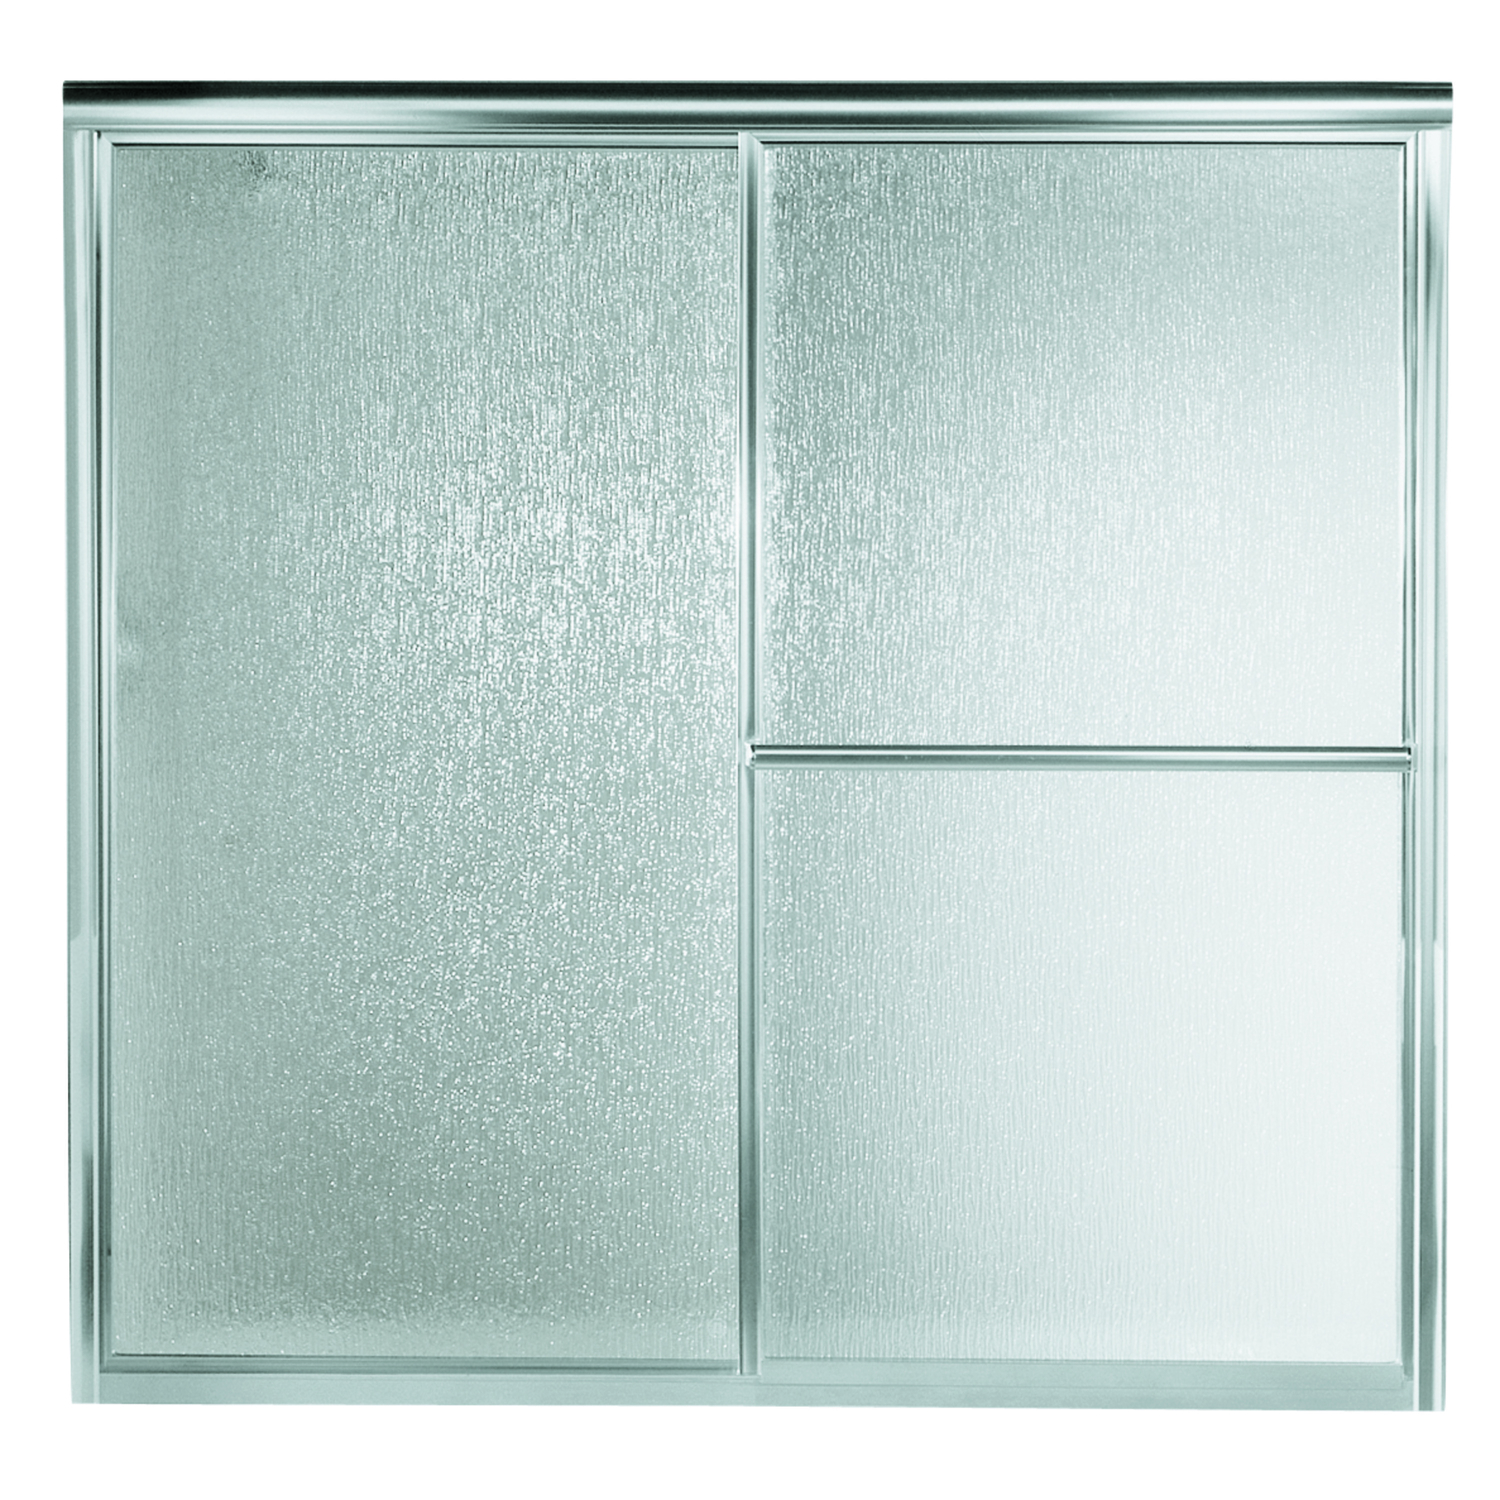 Photos - Shower Screen Sterling Deluxe 56.25 in. H X 59 in. W Silver Framed Tub Door 5906-59S 